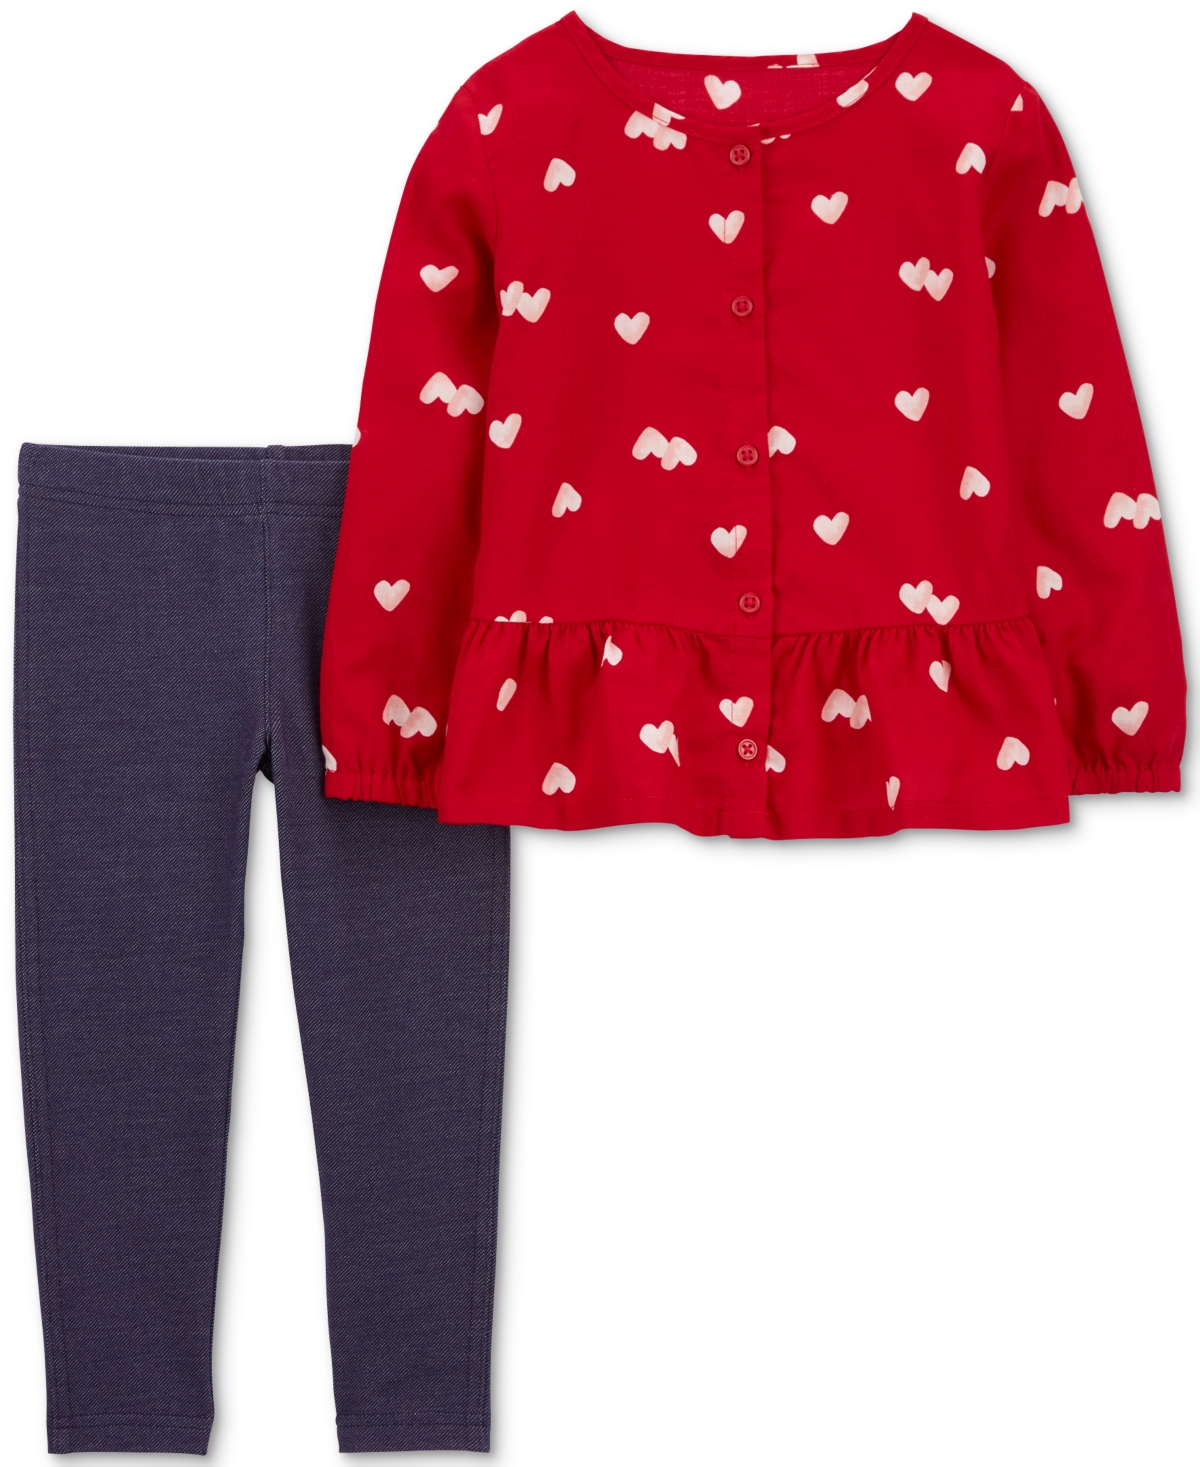 Carter's Babies' Toddler Girls Heart-print Top And Knit Denim Leggings, 2 Piece Set In Red